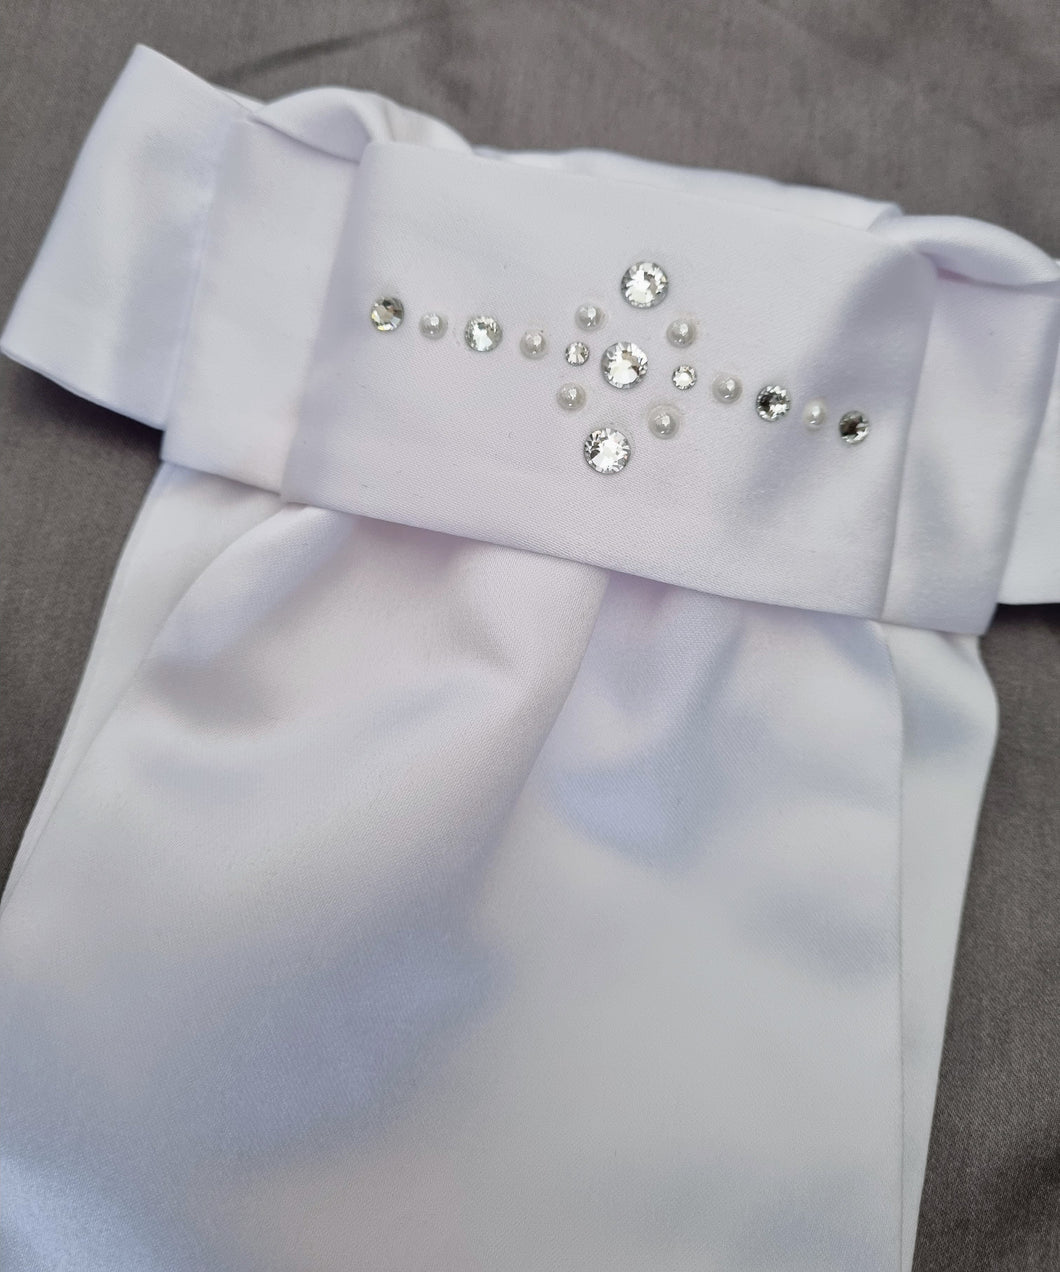 ERA EURO LYNDAL STOCK TIE- White satin or cotton with hand decorated crystals & pearls